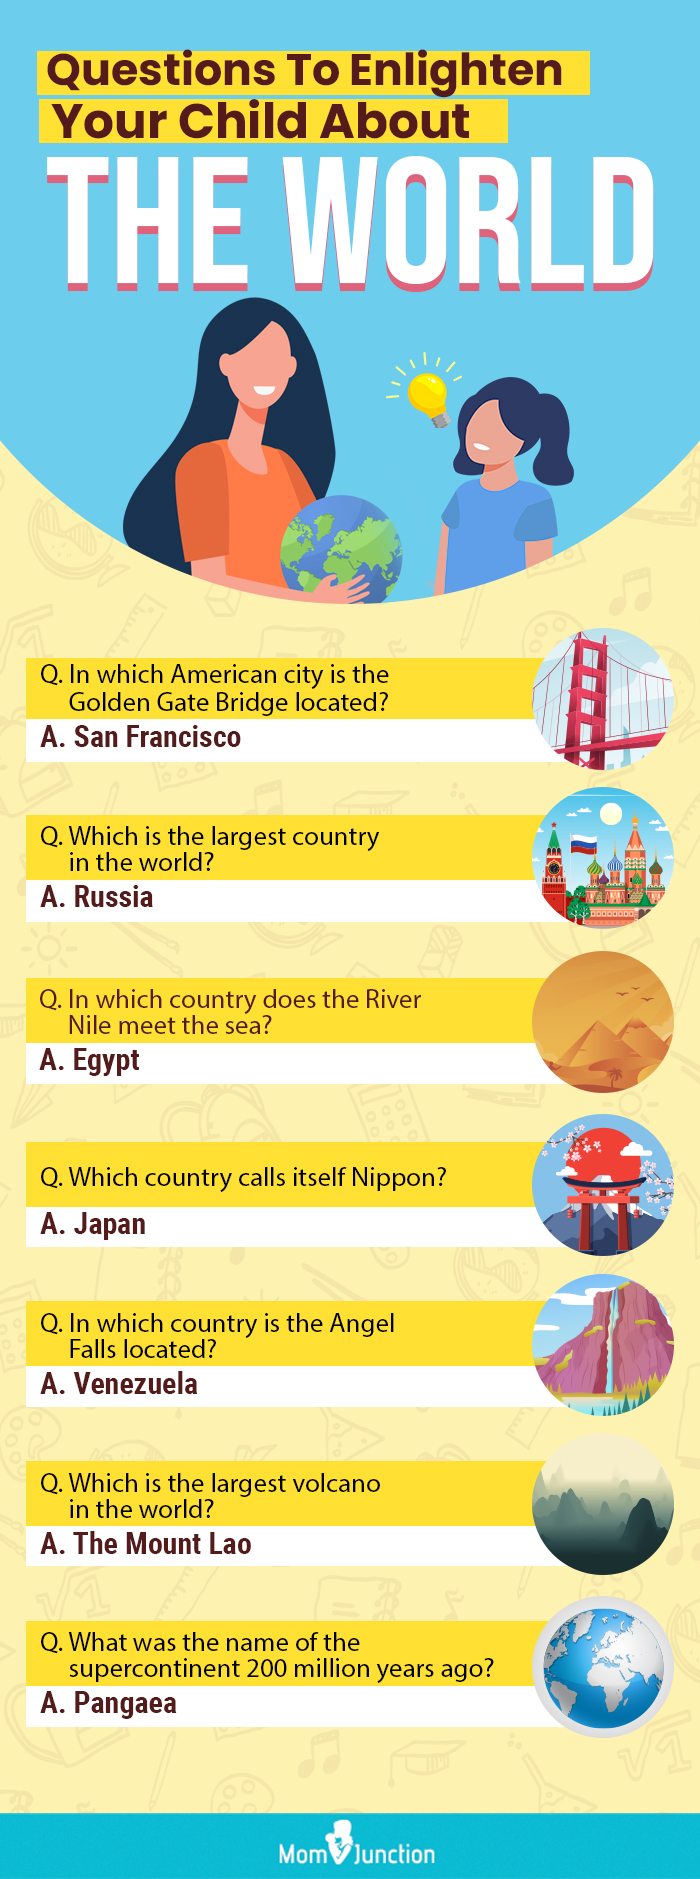 questions to enlighten your child about the world (infographic)